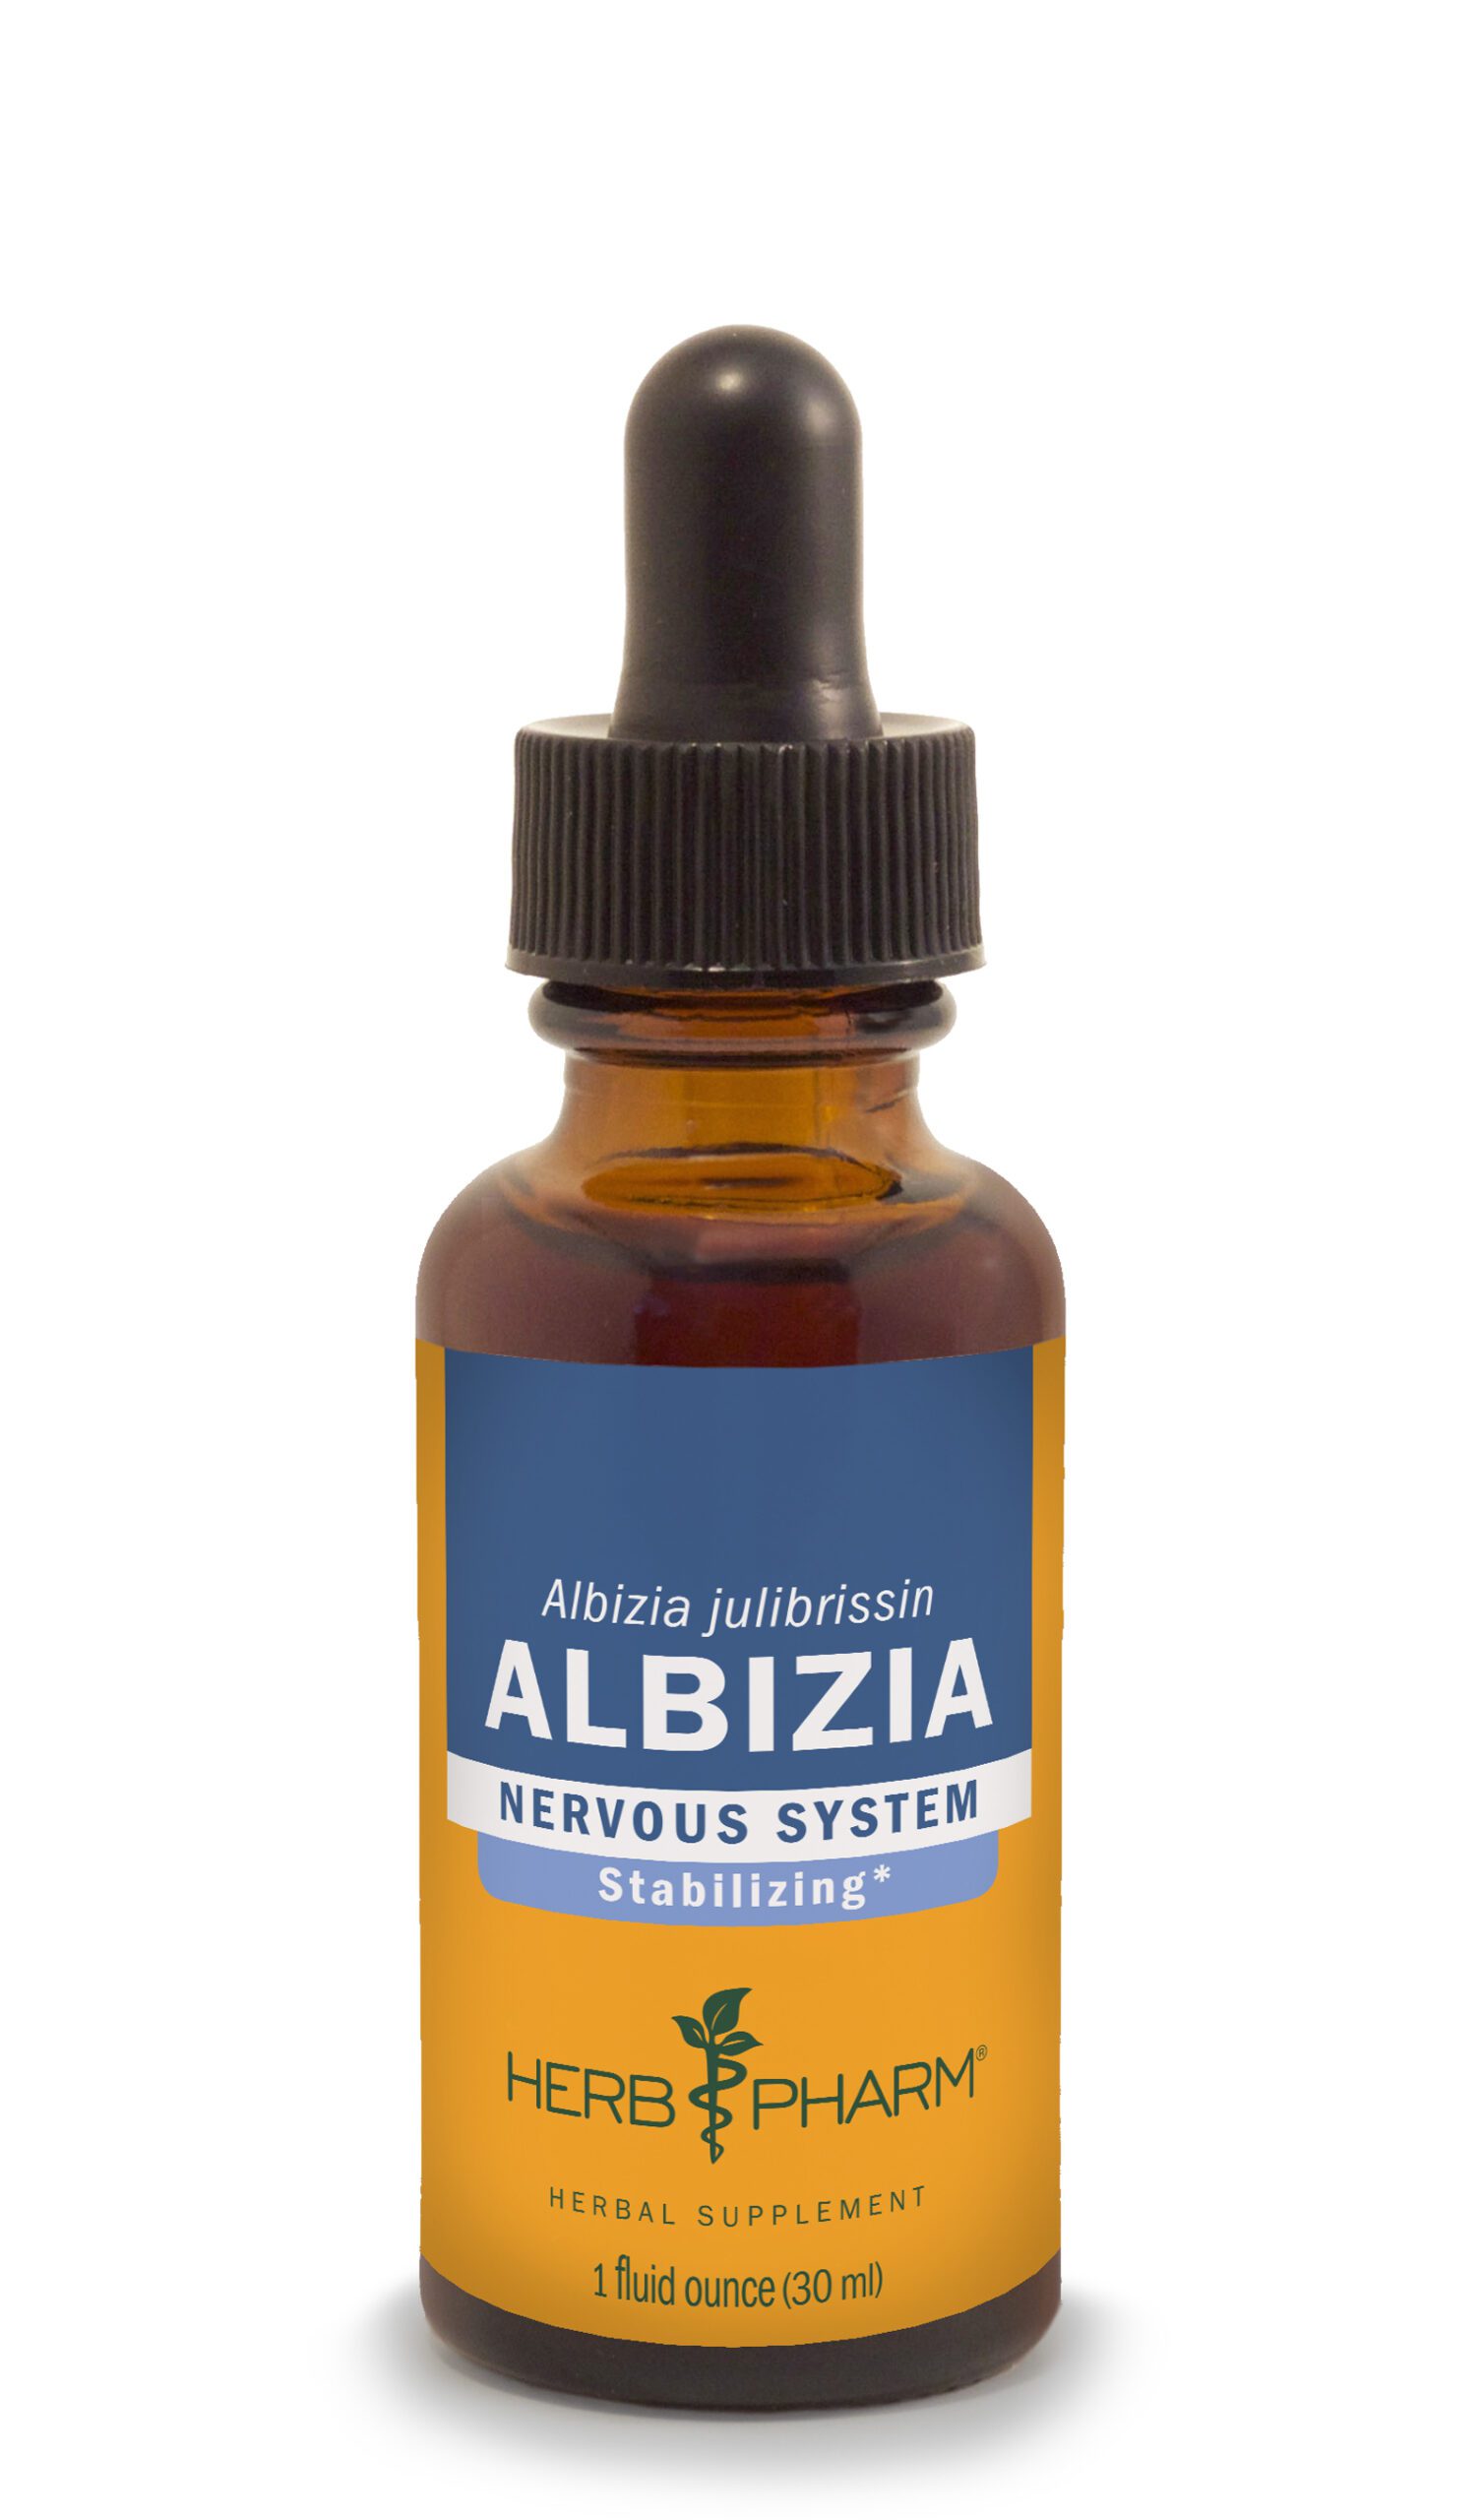 Product Listing Image for Herb Pharm Albizia Tincture